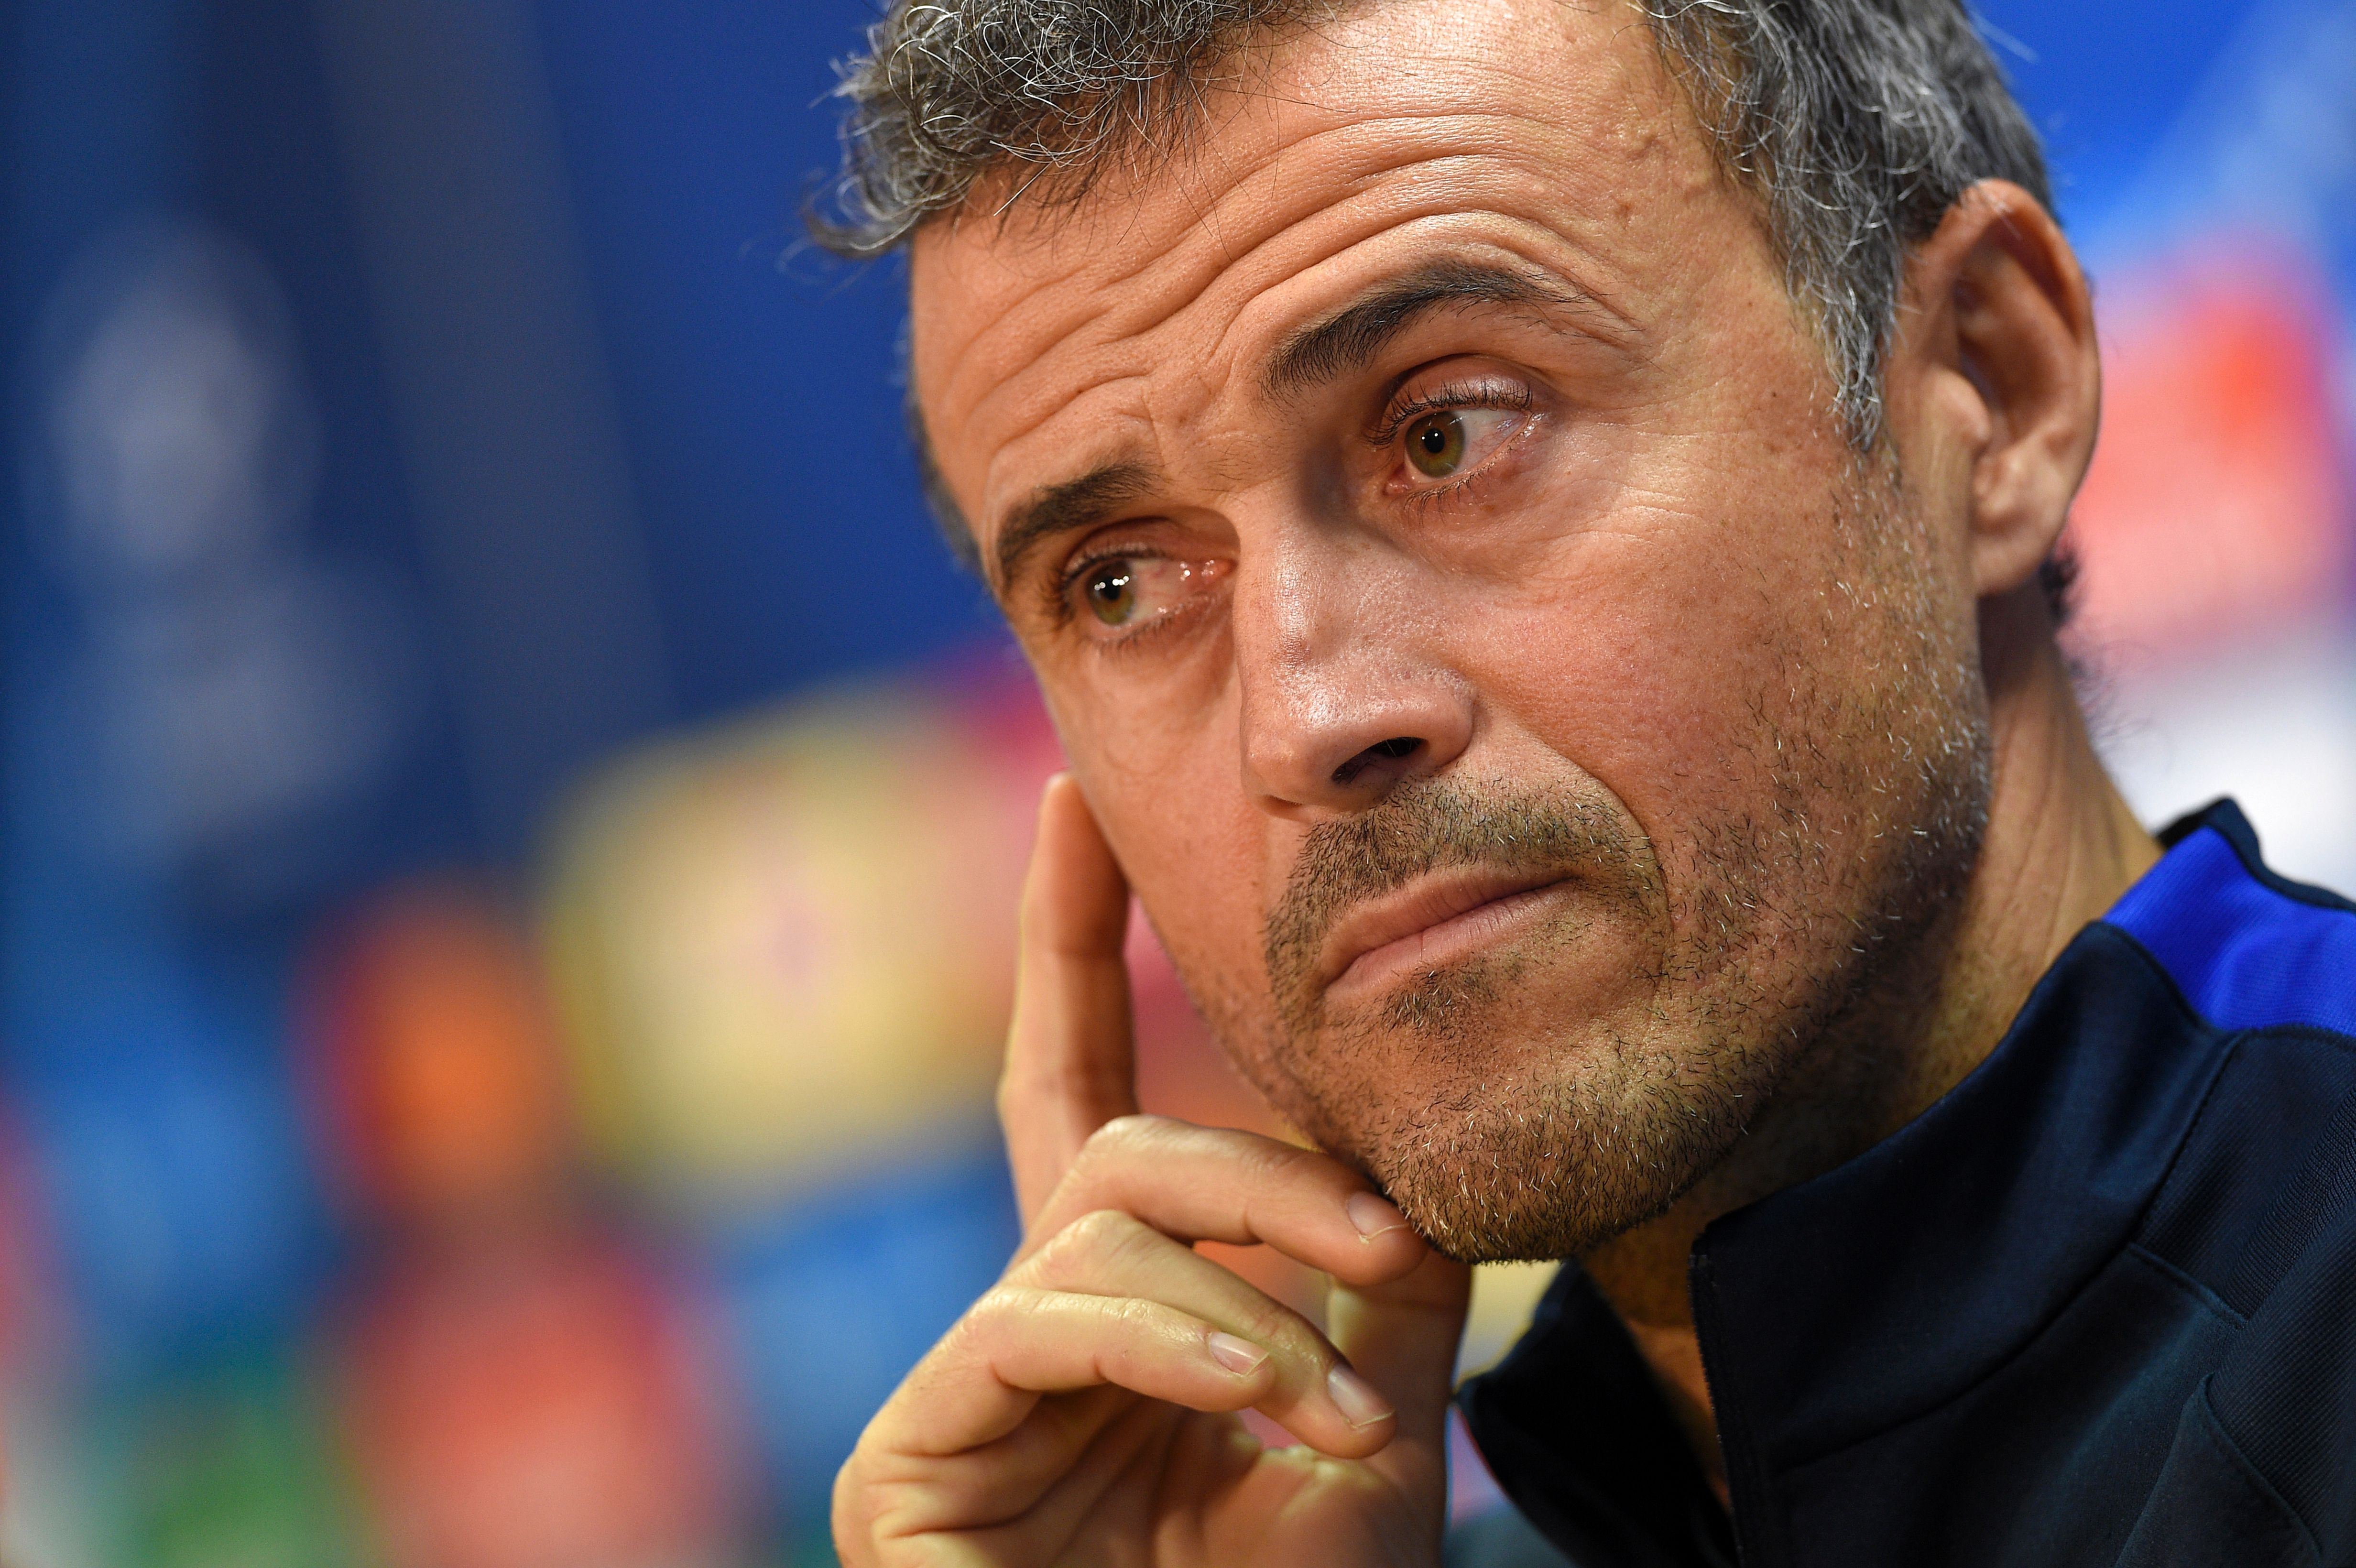 Barcelona's coach Luis Enrique listens to a journalist's question during a press conference at the Sports Center FC Barcelona Joan Gamper in Sant Joan Despi, near Barcelona on December 5, 2016, on the eve of the UEFA Champions League football match FC vs Borussia Moenchengladbach. / AFP / LLUIS GENE        (Photo credit should read LLUIS GENE/AFP/Getty Images)